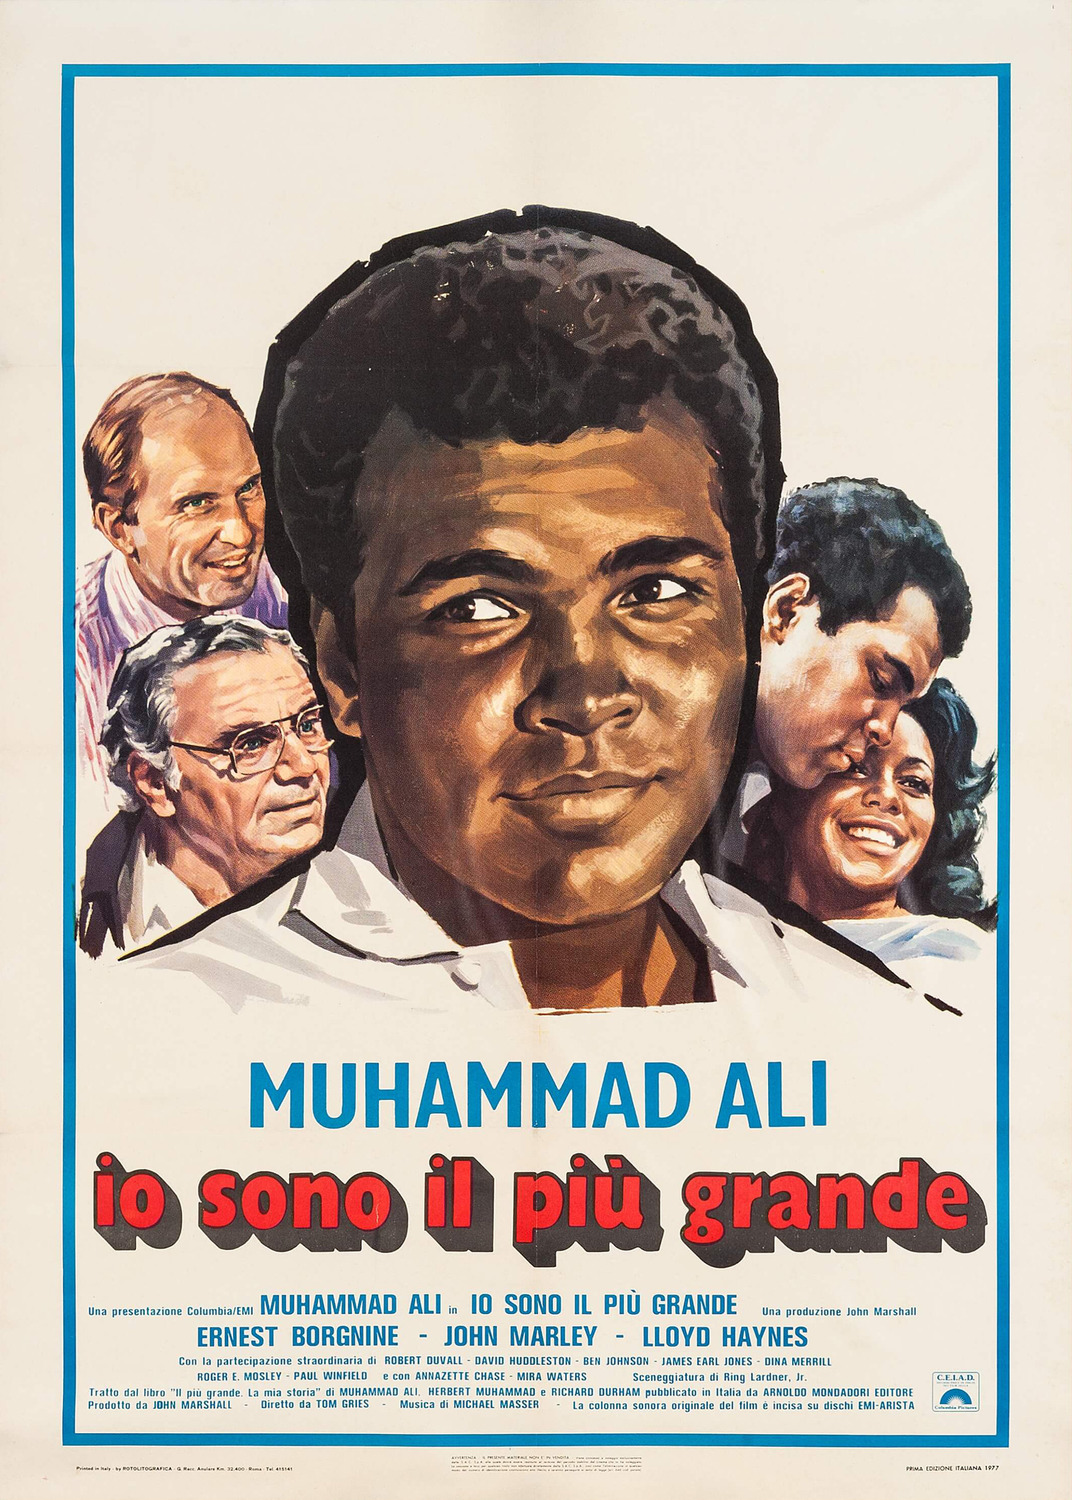 Extra Large Movie Poster Image for The Greatest (#4 of 5)